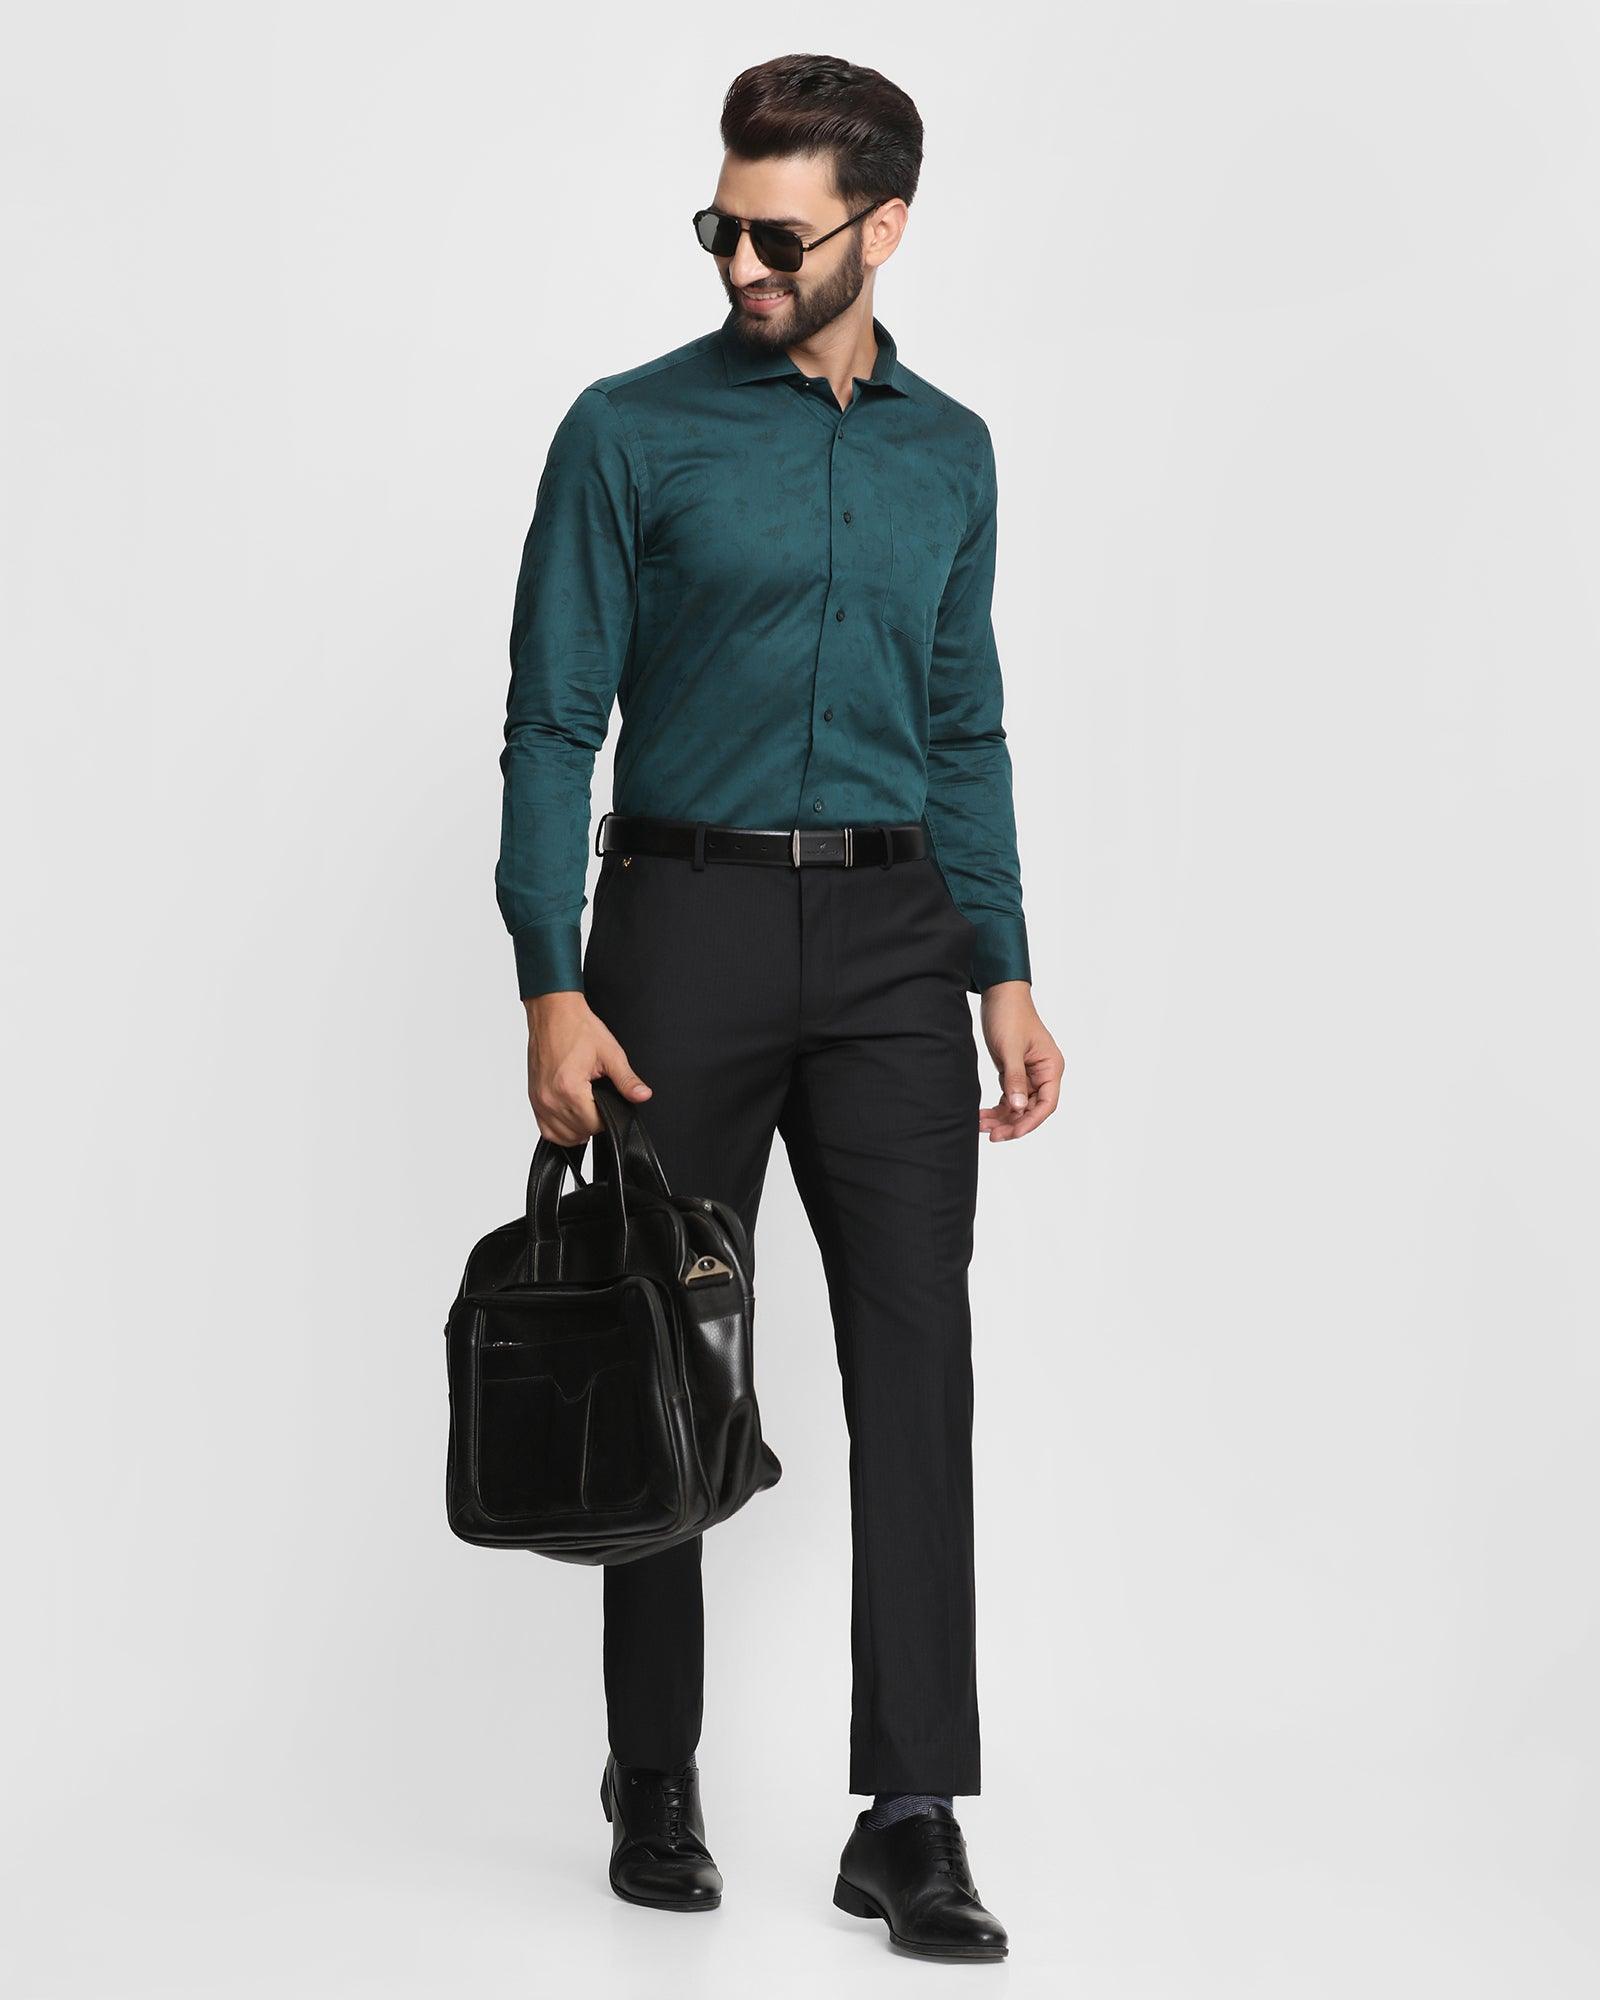 PINE GREEN BLOUSE w. black pants & shoes | Green top outfit, Classy work  outfits, Green shirt outfits